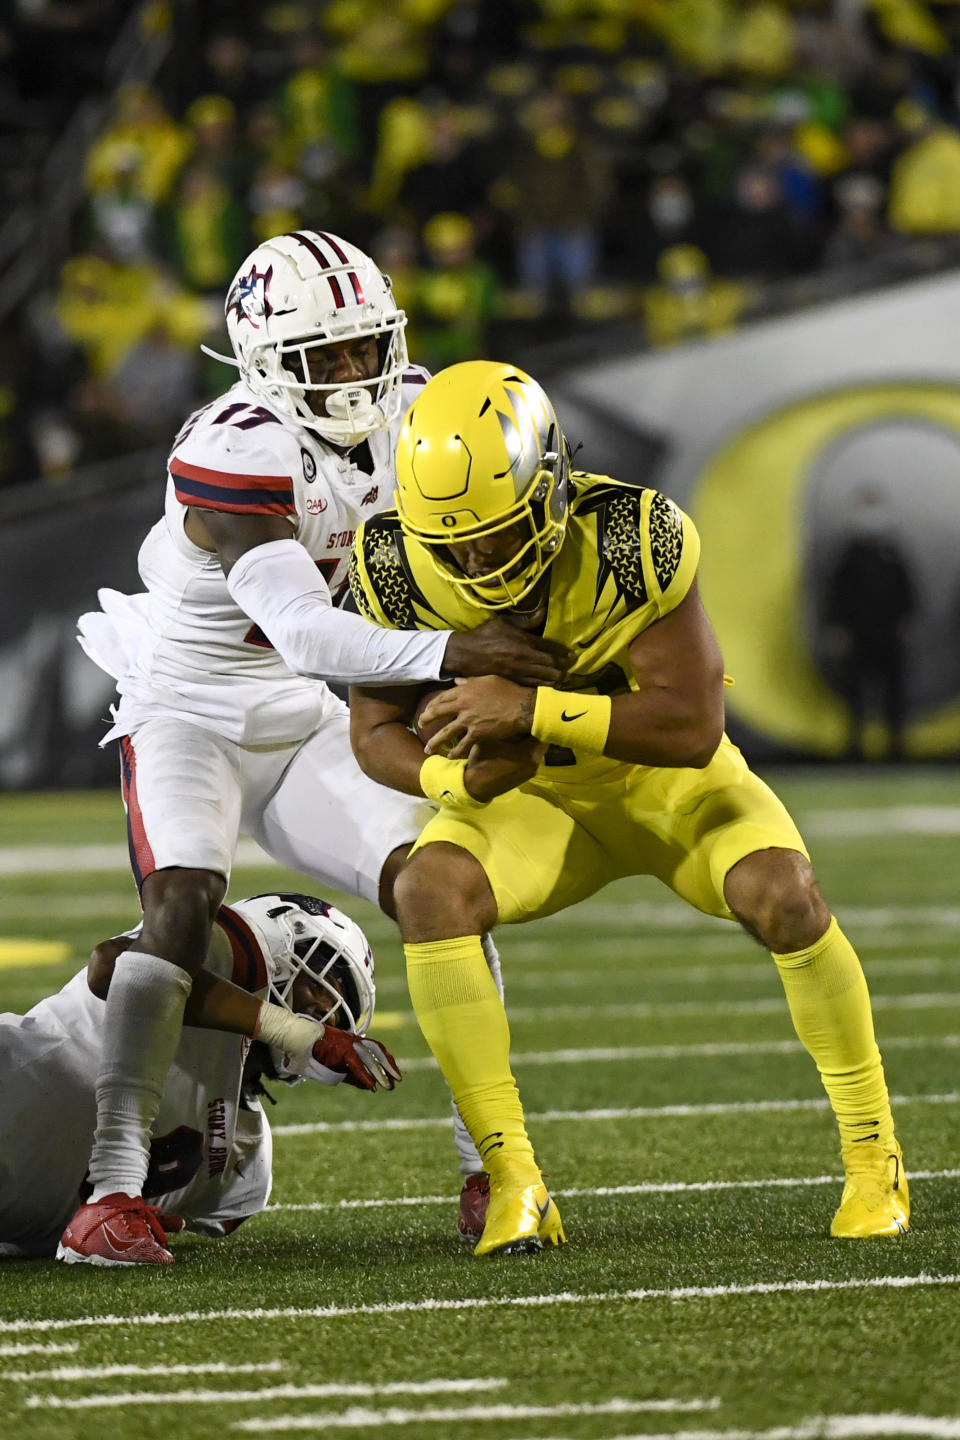 Stony Brook defensive back Carthell Flowers, left, sacks Oregon quarterback Ty Thompson, right, during the fourth quarter of an NCAA college football game Saturday, Sept. 18, 2021, in Eugene, Ore. (AP Photo/Andy Nelson)